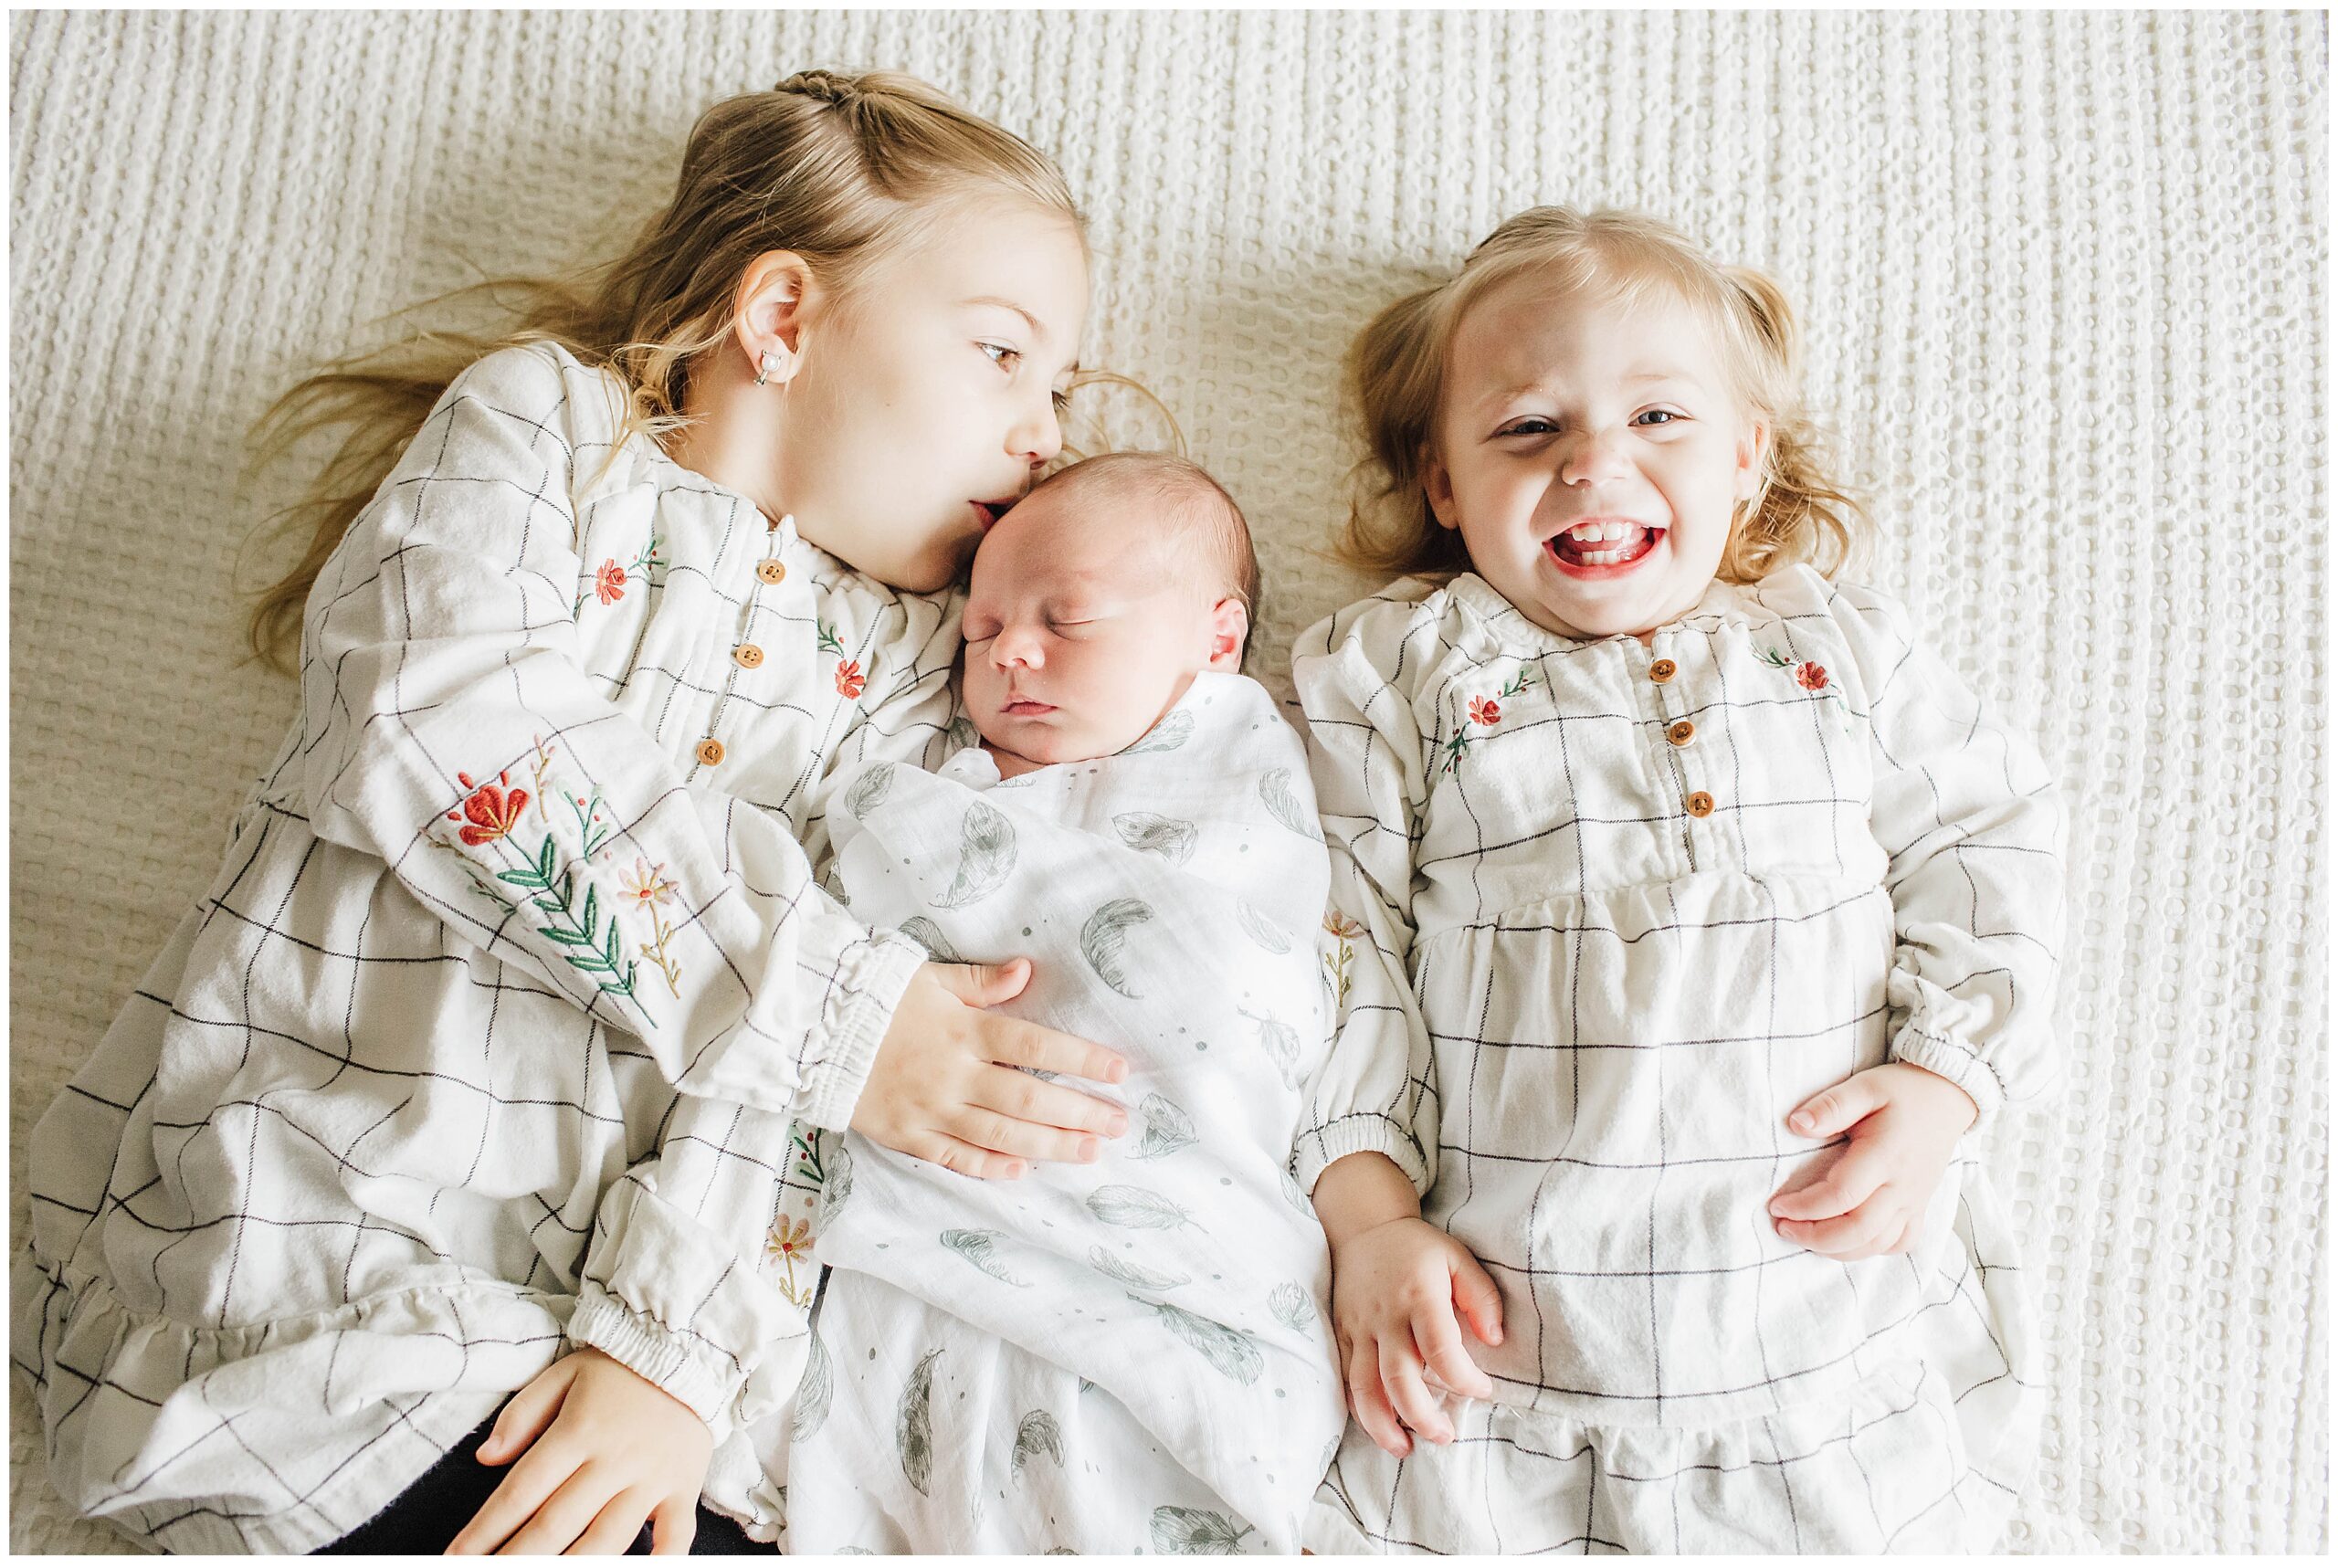 Image of siblings kissing baby brother during a newborn photoshoot